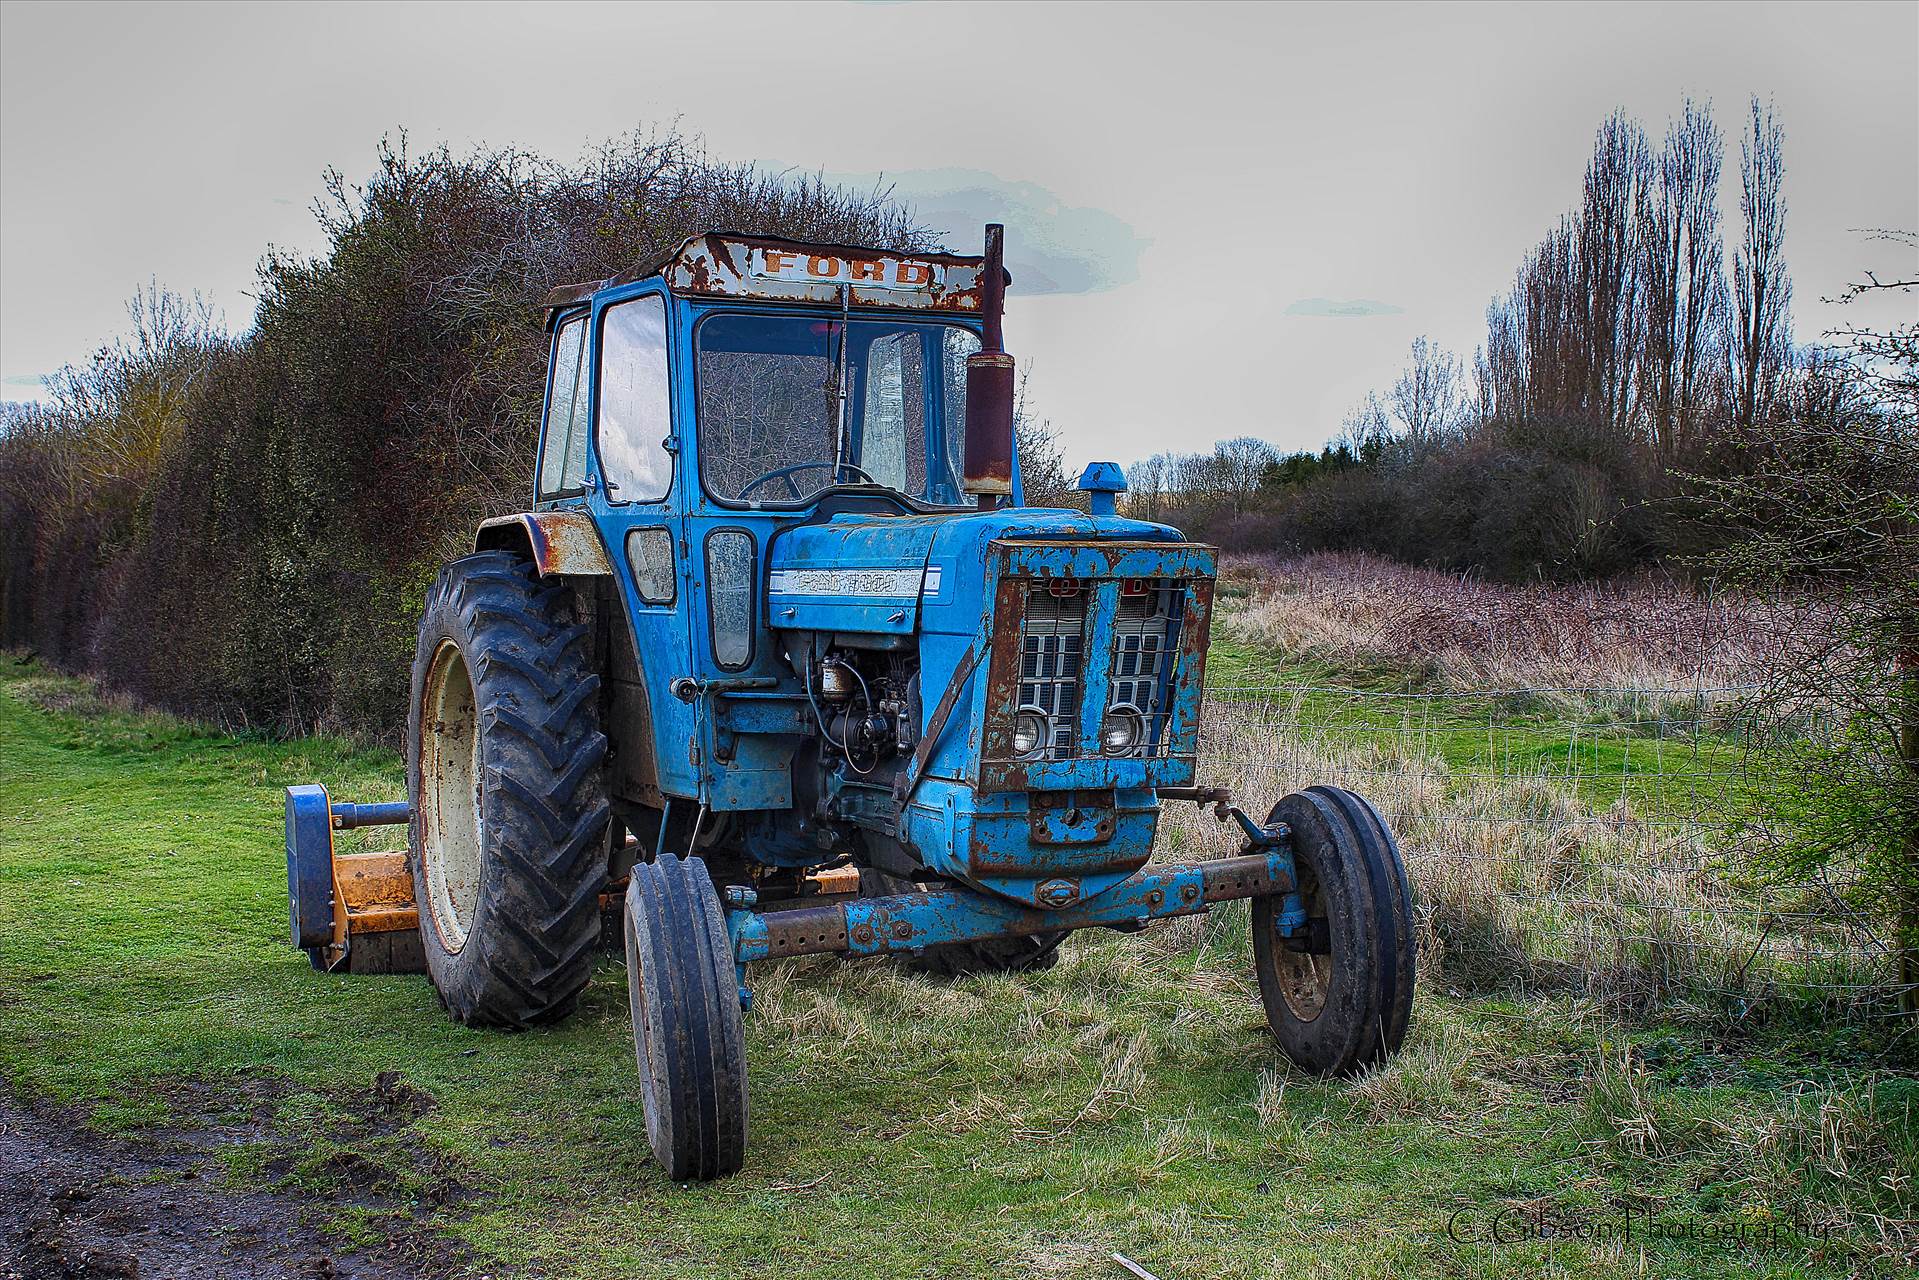 Ford Tractor.jpg - undefined by Craig Gibson